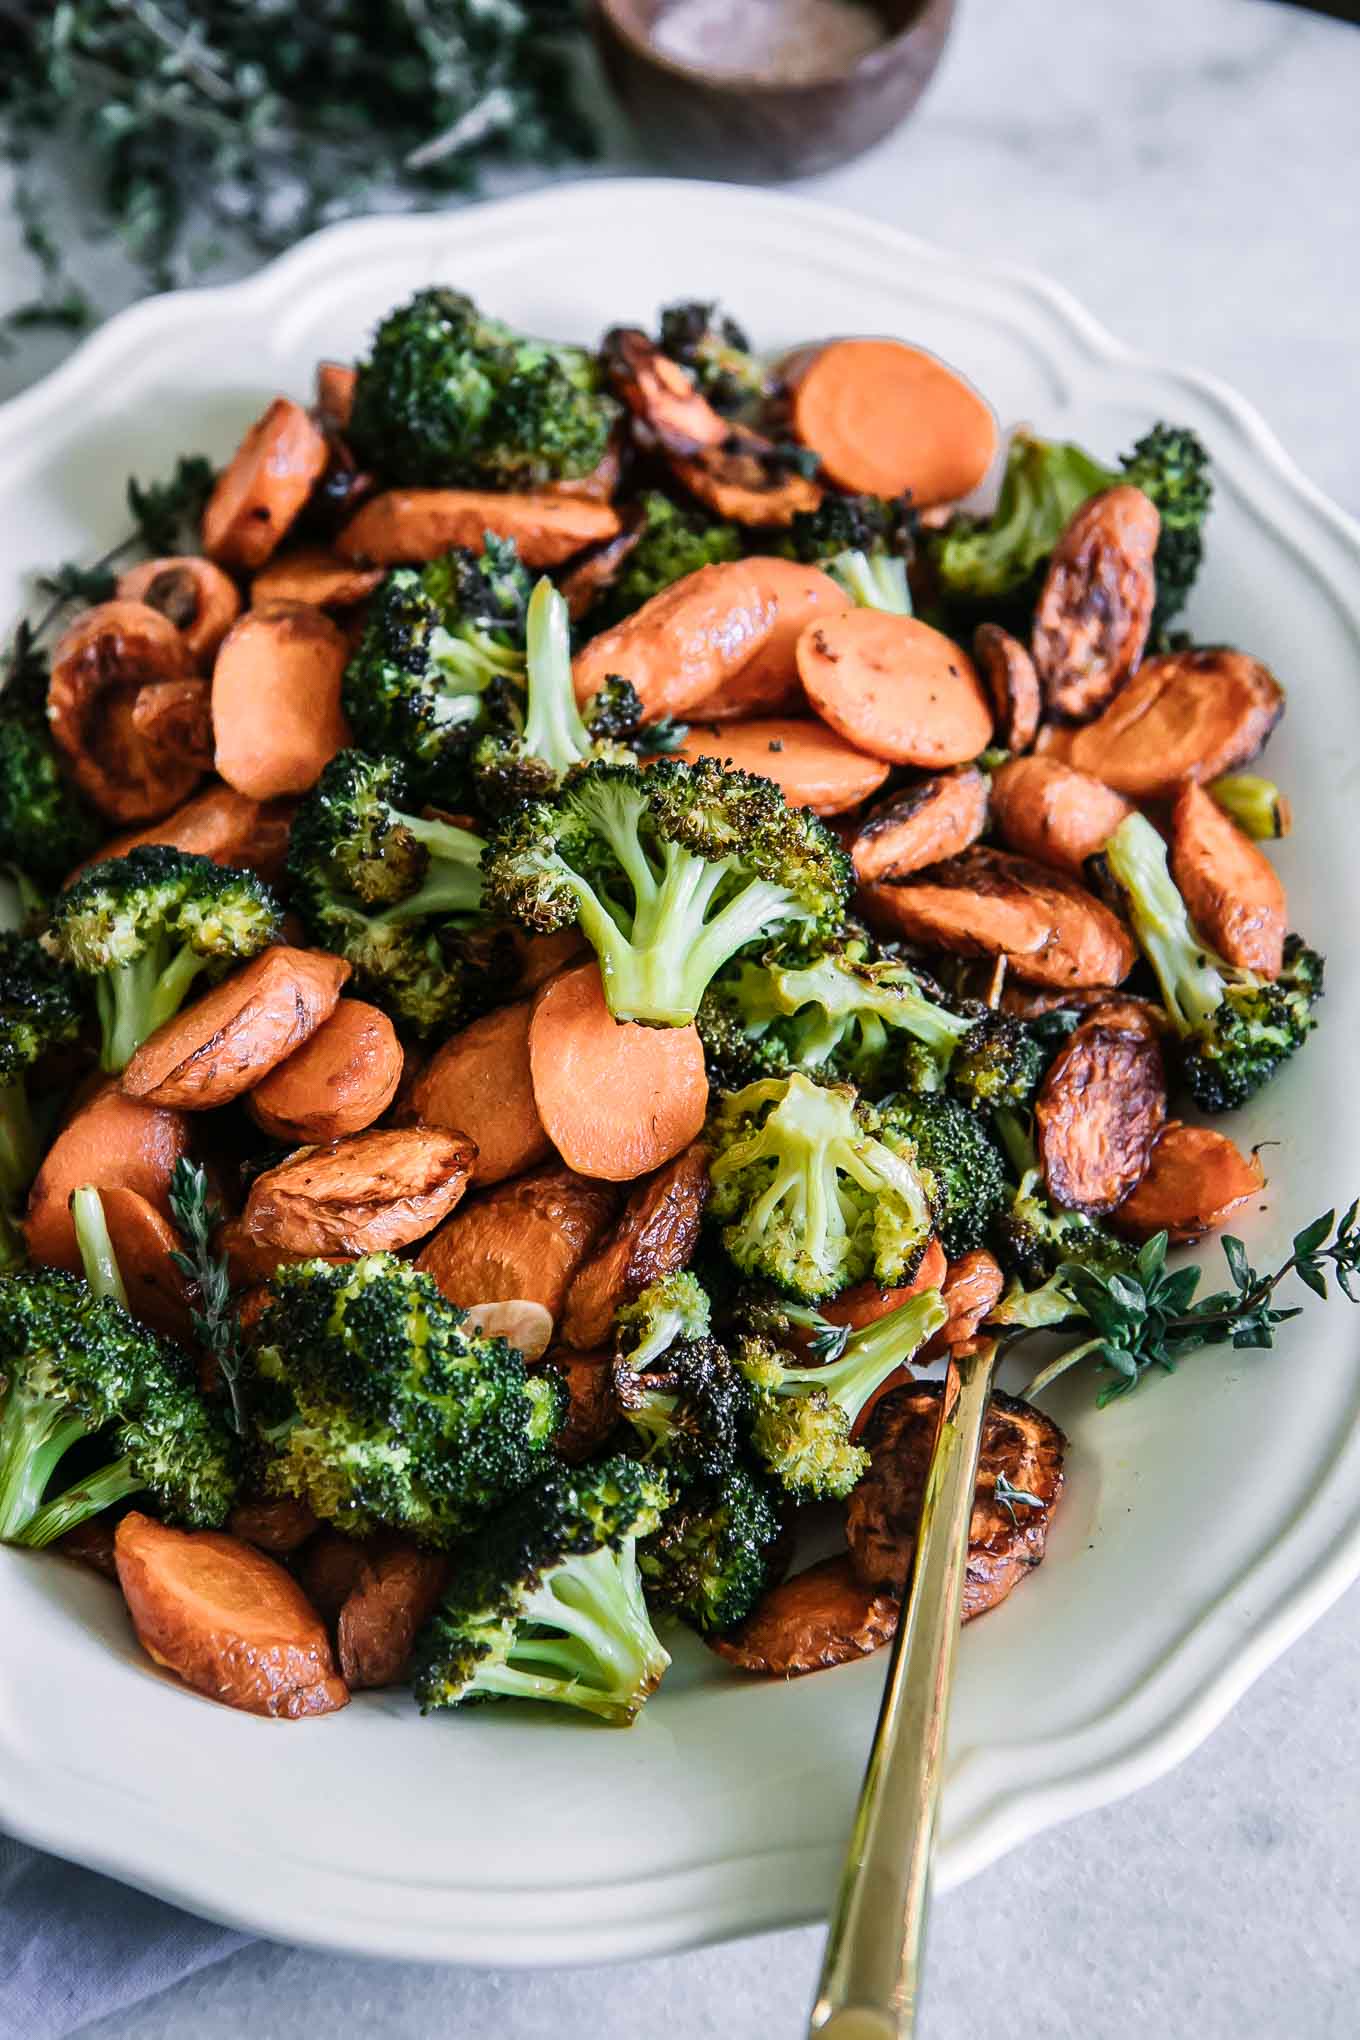 Roasted Broccoli and Carrots ⋆ 5 Ingredients, 30 Minutes, Super Tasty!